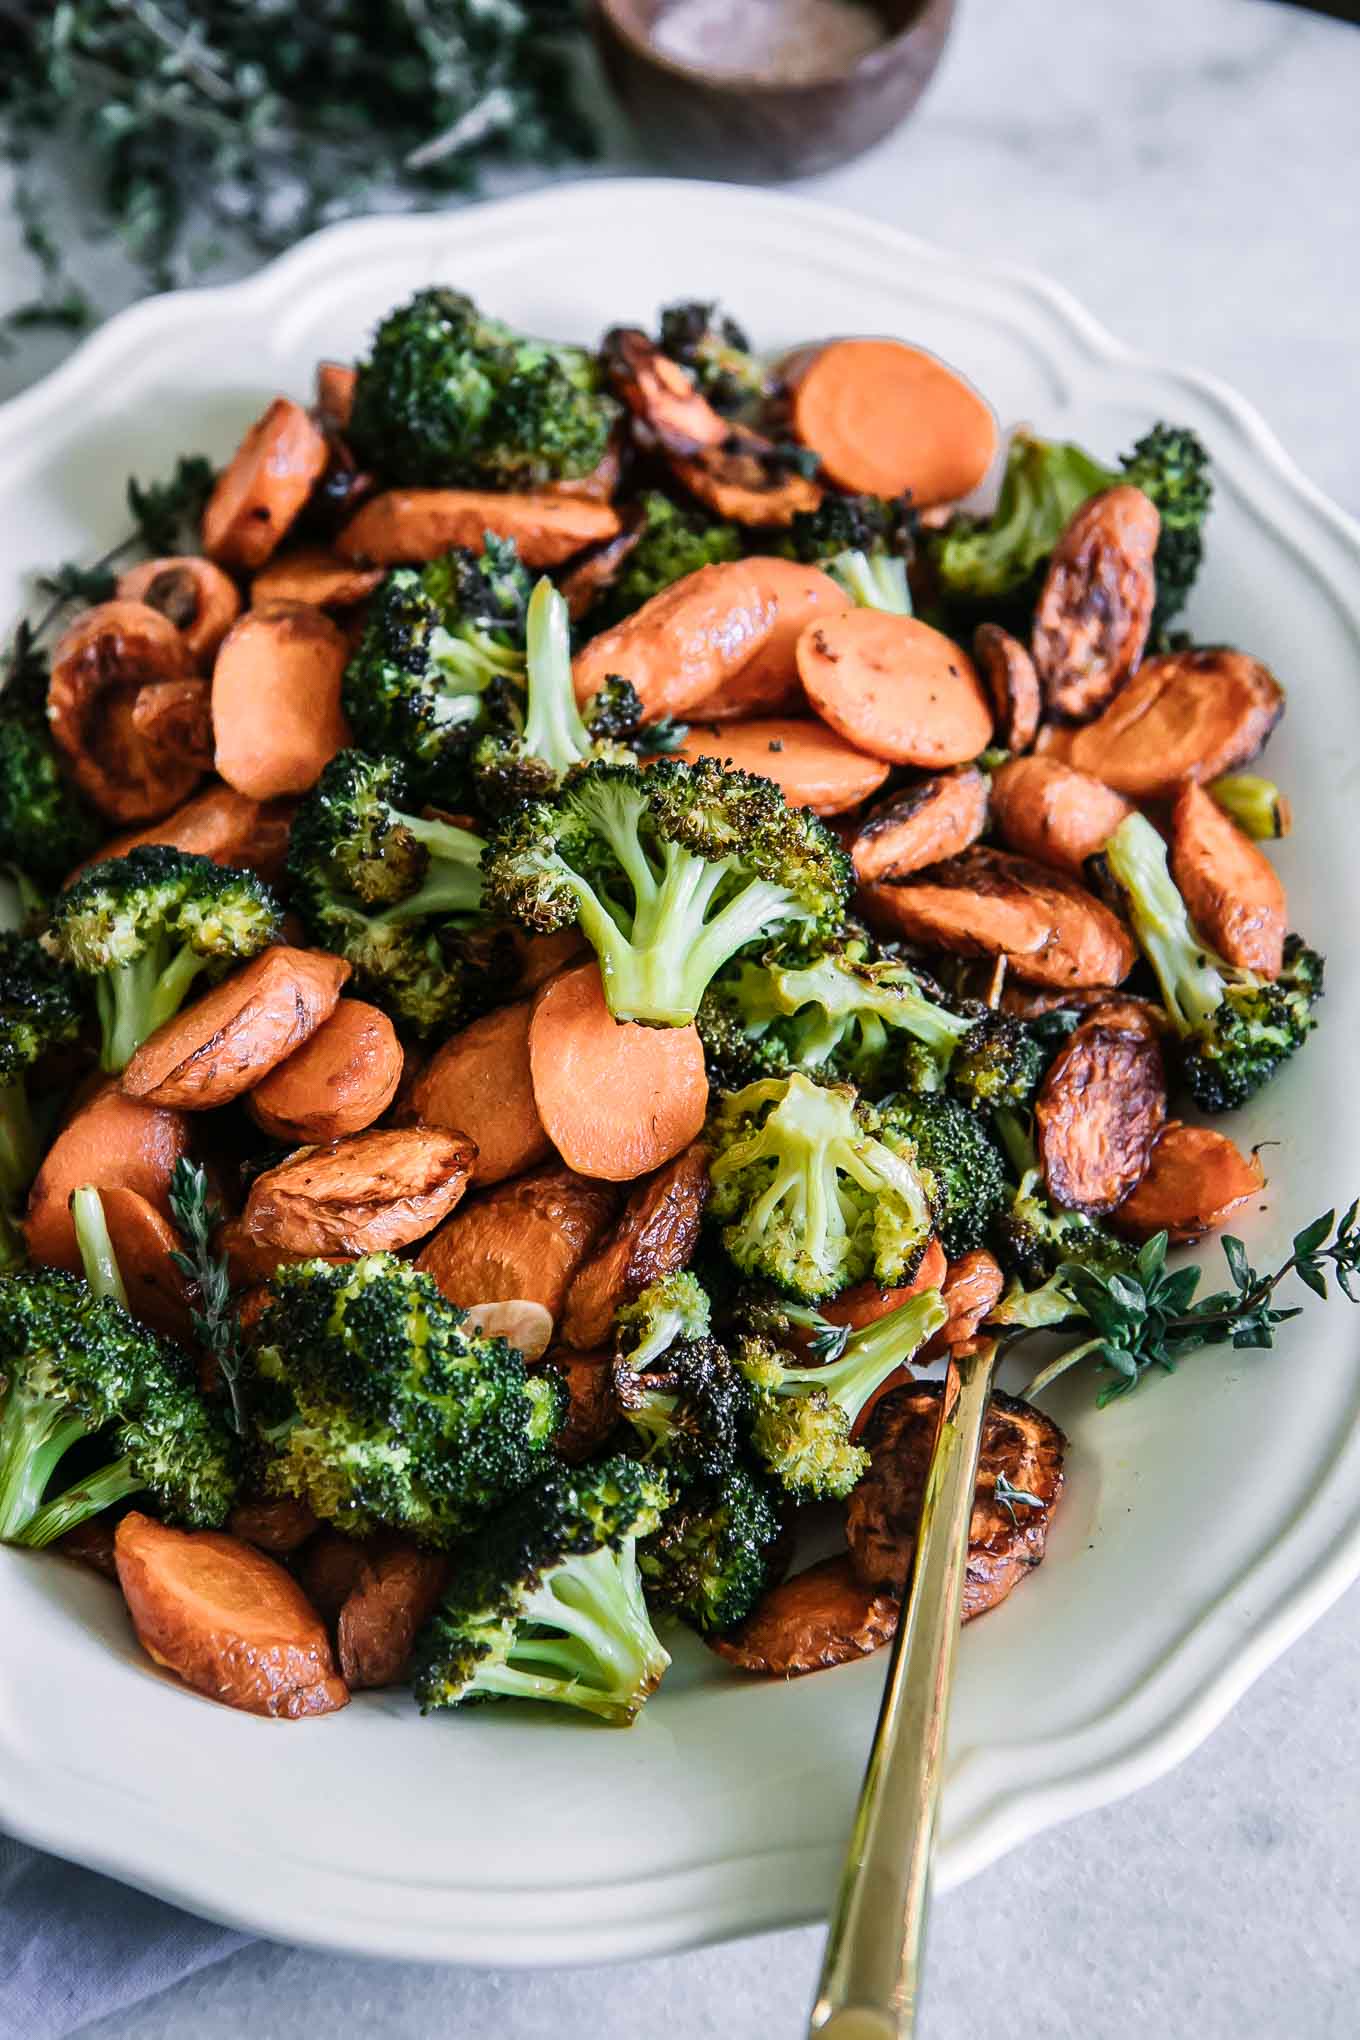 Roasted Broccoli and Carrots ⋆ 5 Ingredients, 30 Minutes, Super Tasty!